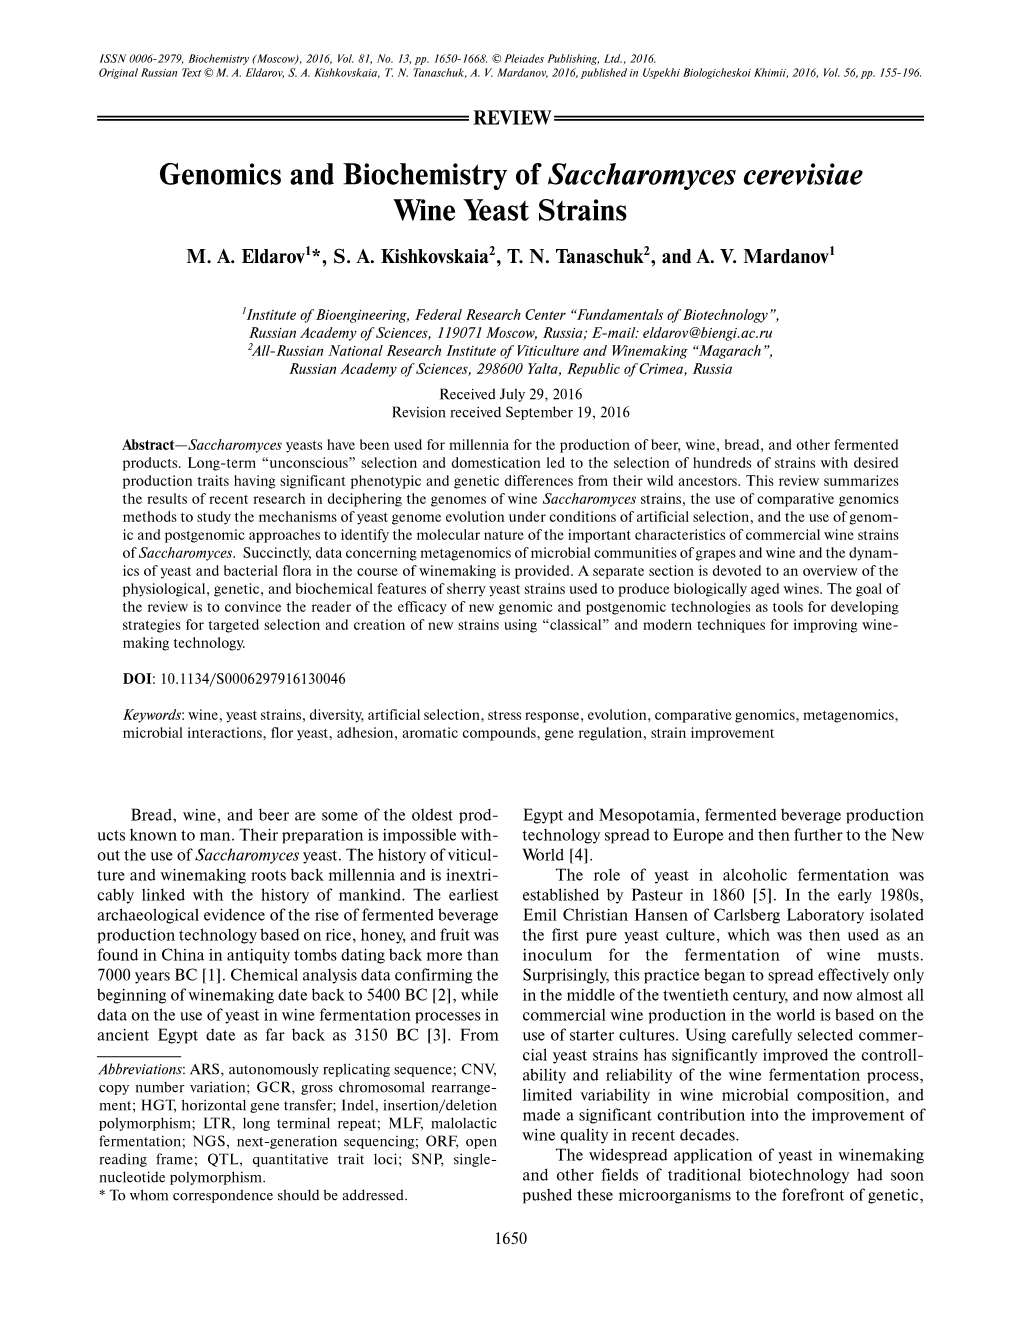 Genomics and Biochemistry of Saccharomyces Cerevisiae Wine Yeast Strains